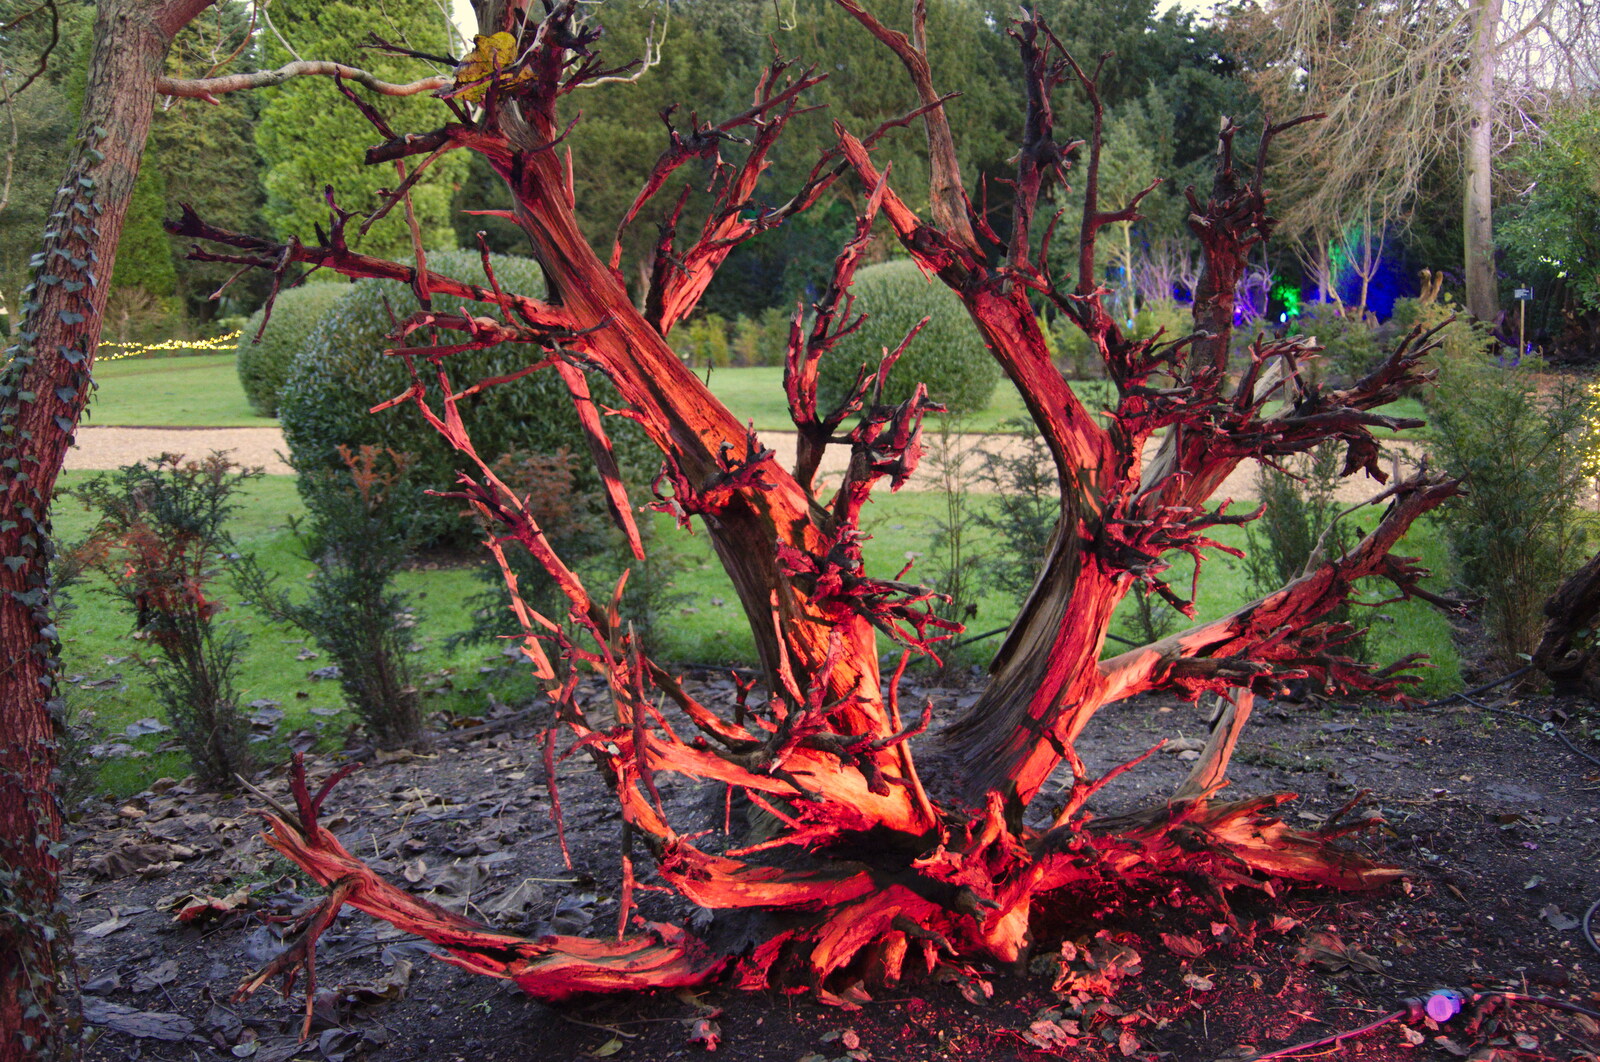 A tree stump is lit up in red from The Tiles of Ickworth House, Horringer, Suffolk - 30th November 2019